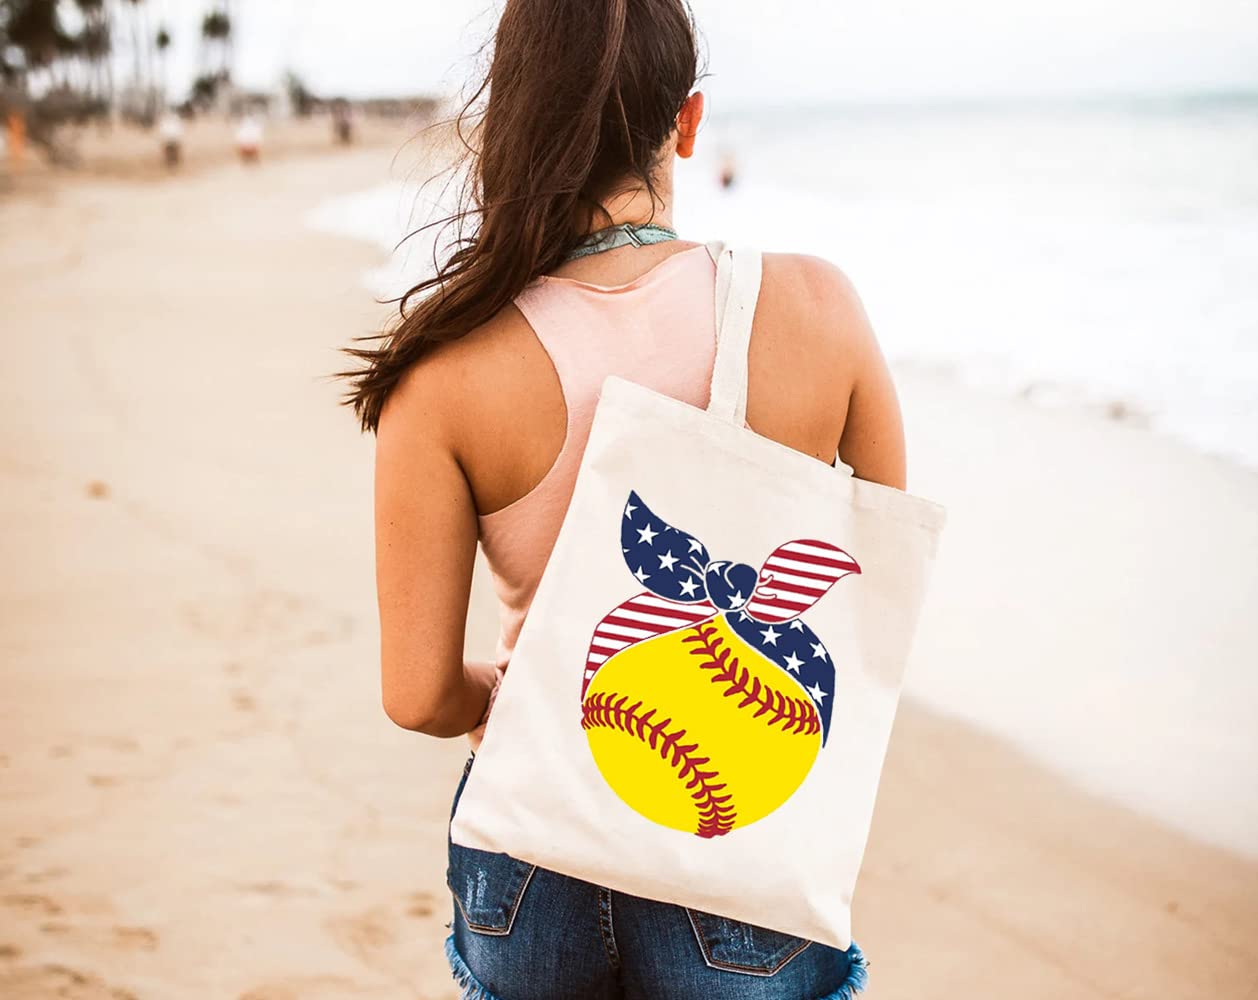 GXVUIS Softball Canvas Tote Bag for Women American Flag Bandana Reusable Travel Grocery Shoulder Shopping Bags Funny Gifts White